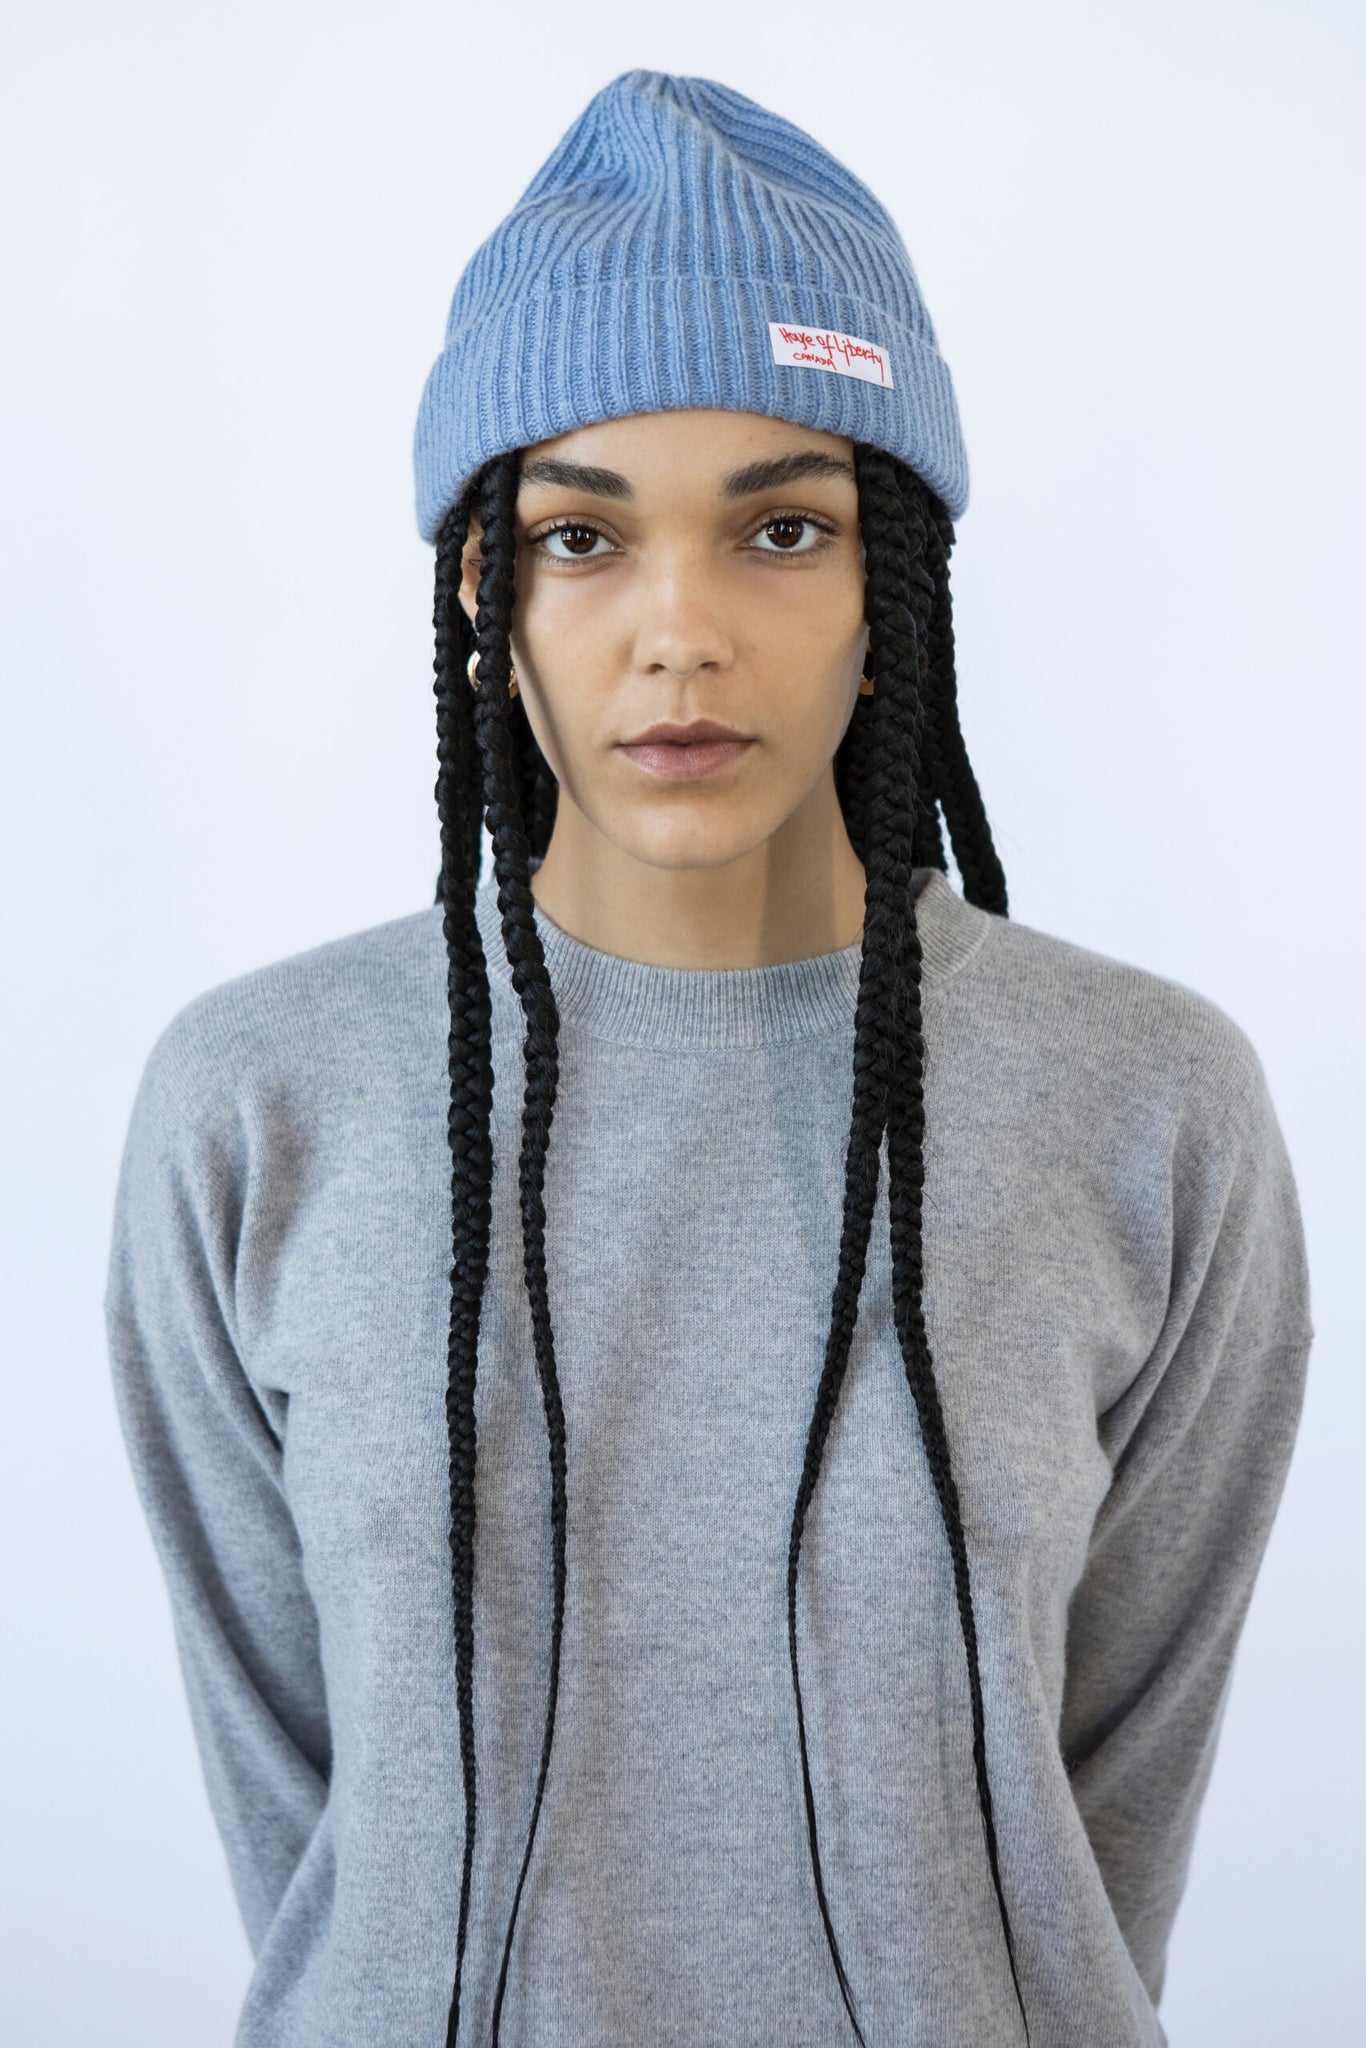 UNIKONCEPT Lifestyle Boutique and Lounge; House of Liberty Cashmere Roxy Ribbed Beanie in colour Jean Blue featured on a model